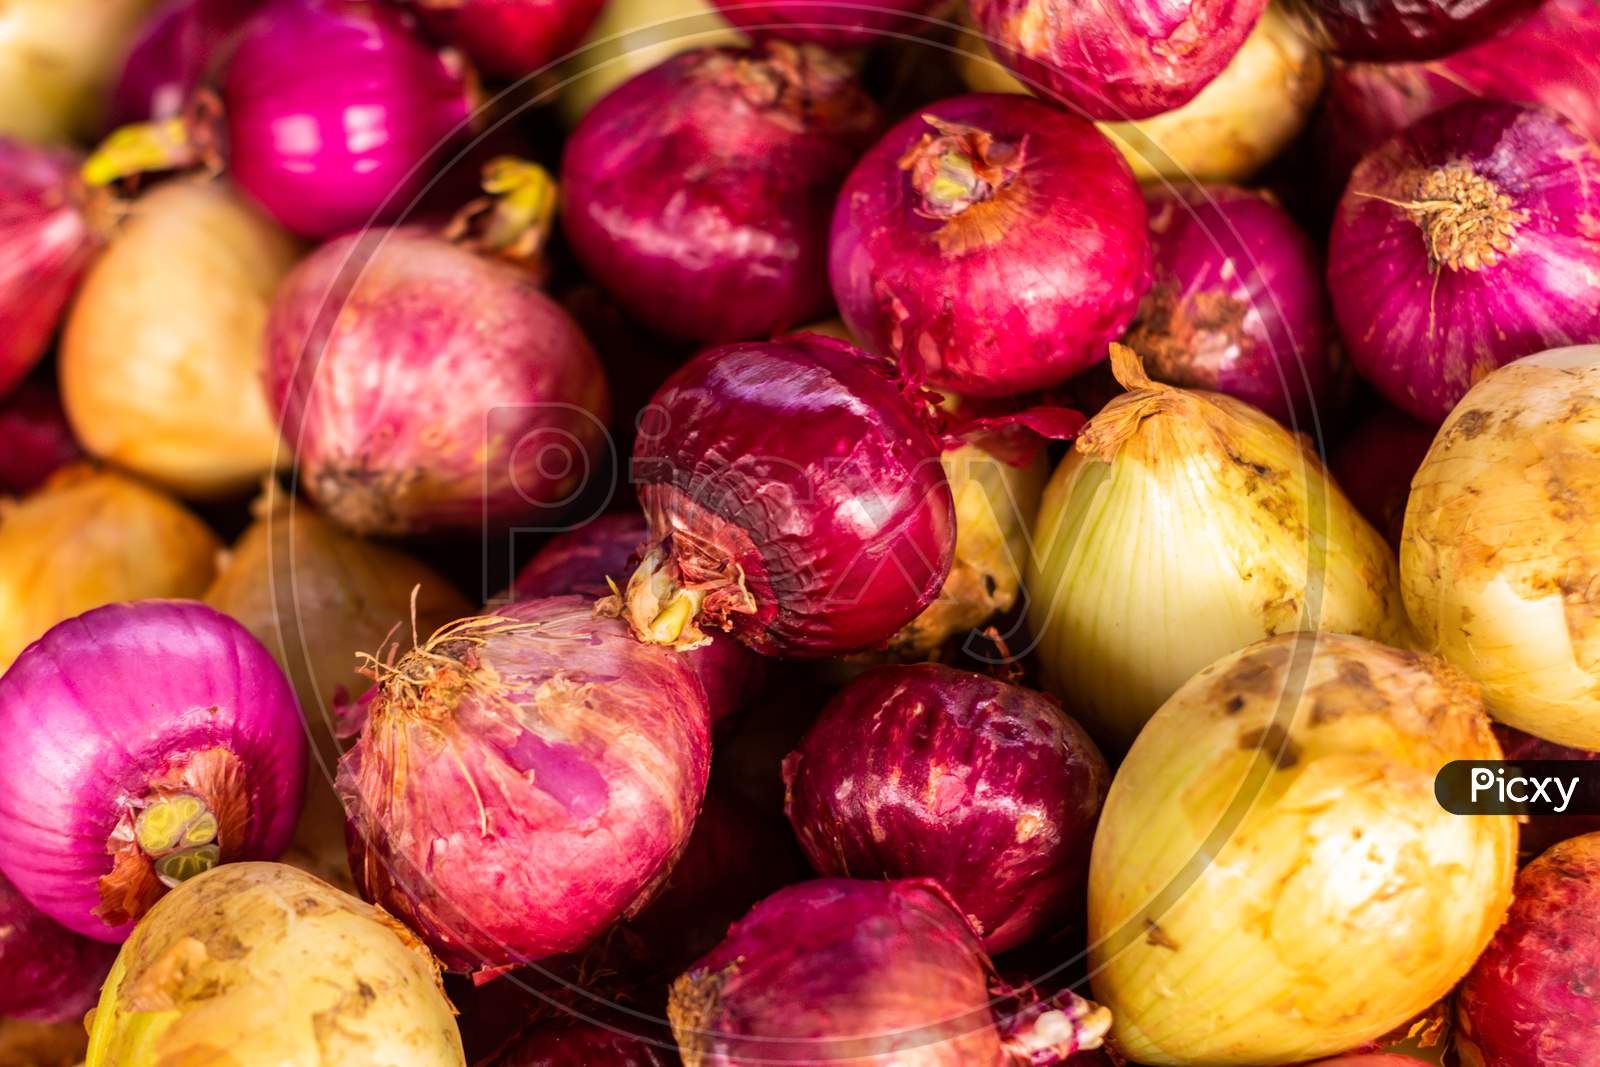 Red Onions In Unpeeled. Fresh Vegetables For Cooking. Organic Food.